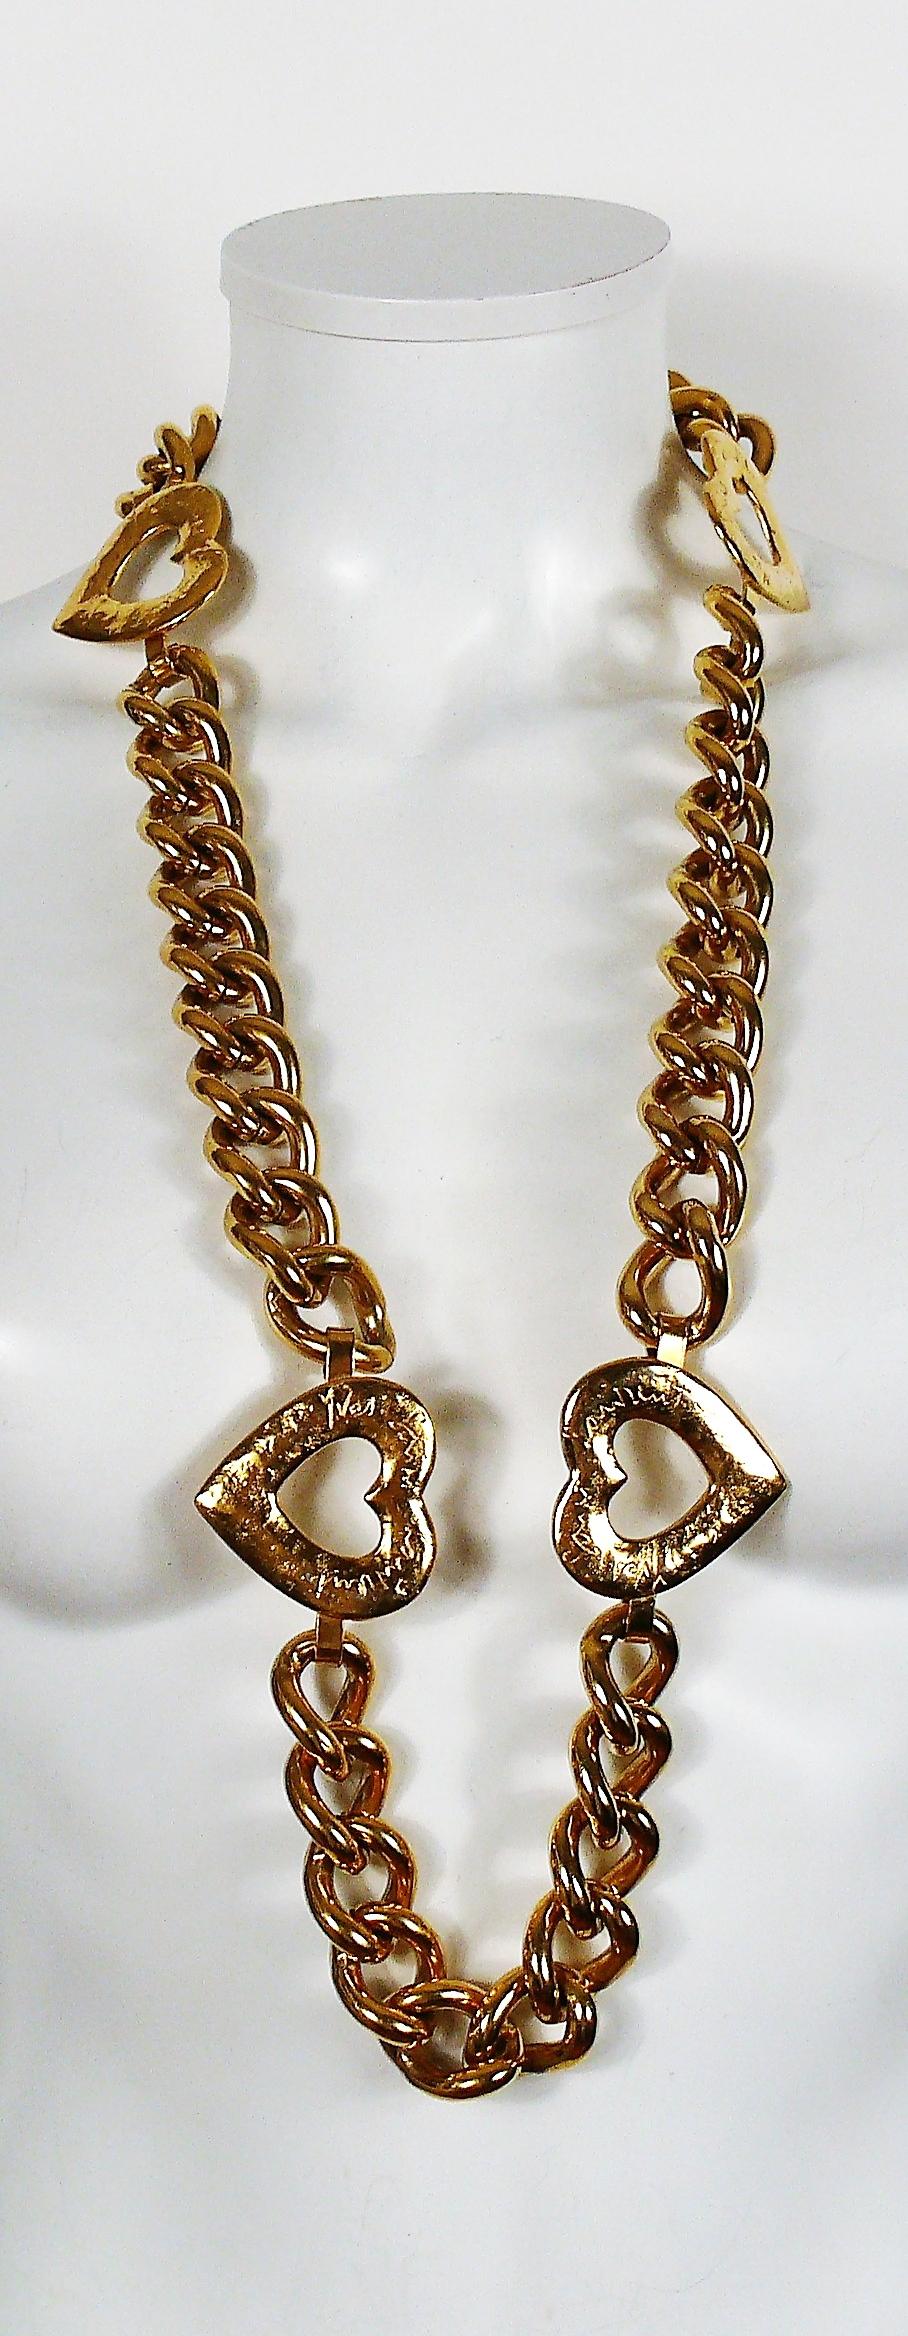 YVES SAINT LAURENT vintage chunky chain necklace/belt featuring textured hearts embossed YVES SAINT LAURENT.

Hook closure.
Adjustable length.

Has some weight on it.

Indicative measurements : total length approx. 97 cm (38.19 inches) / heart